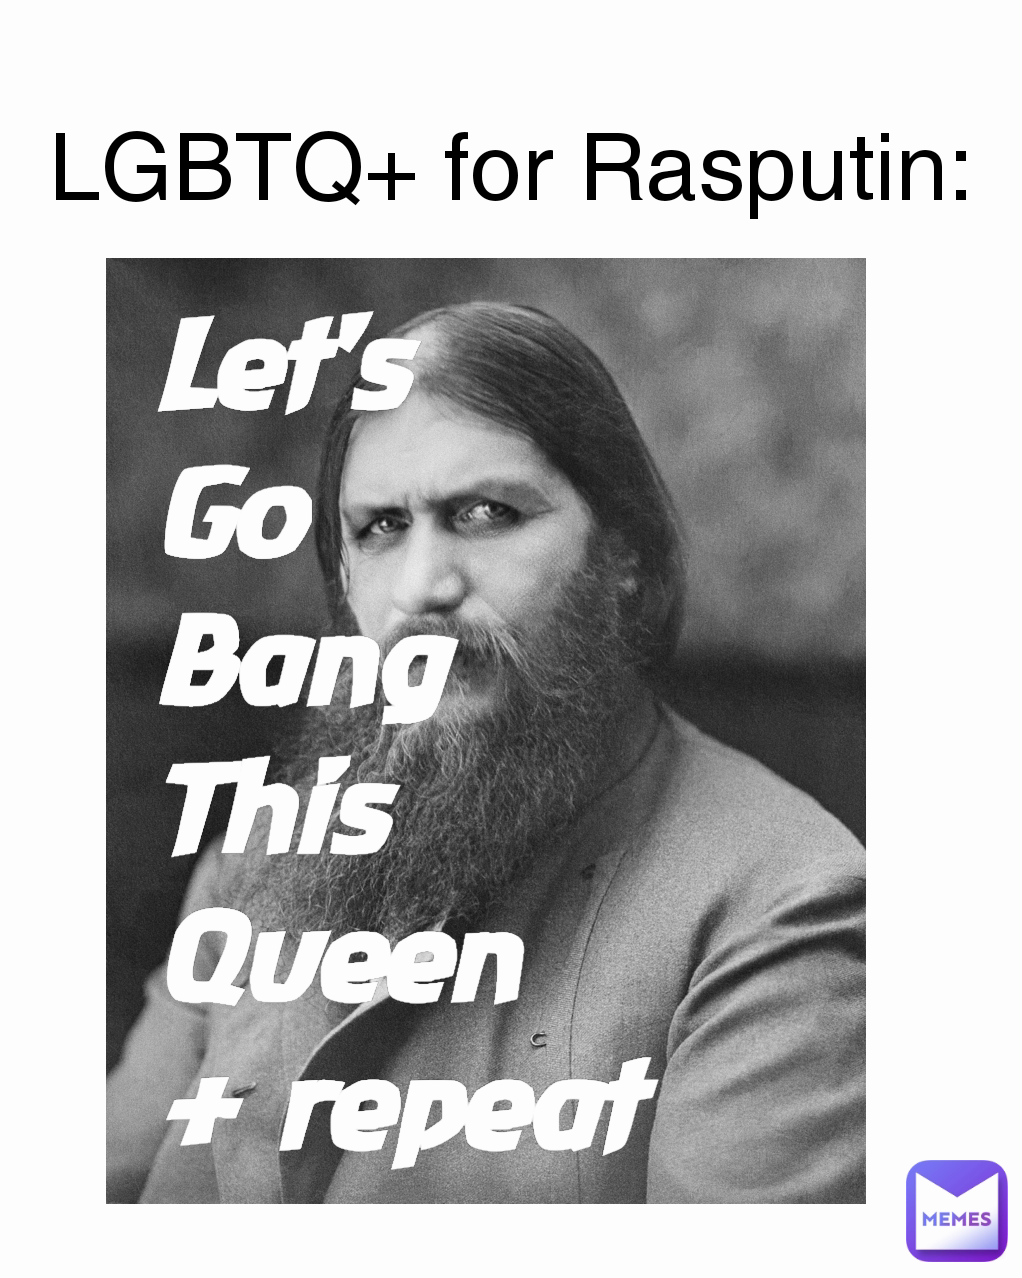 LGBTQ+ for Rasputin: Let's
Go
Bang
This
Queen
+ repeat